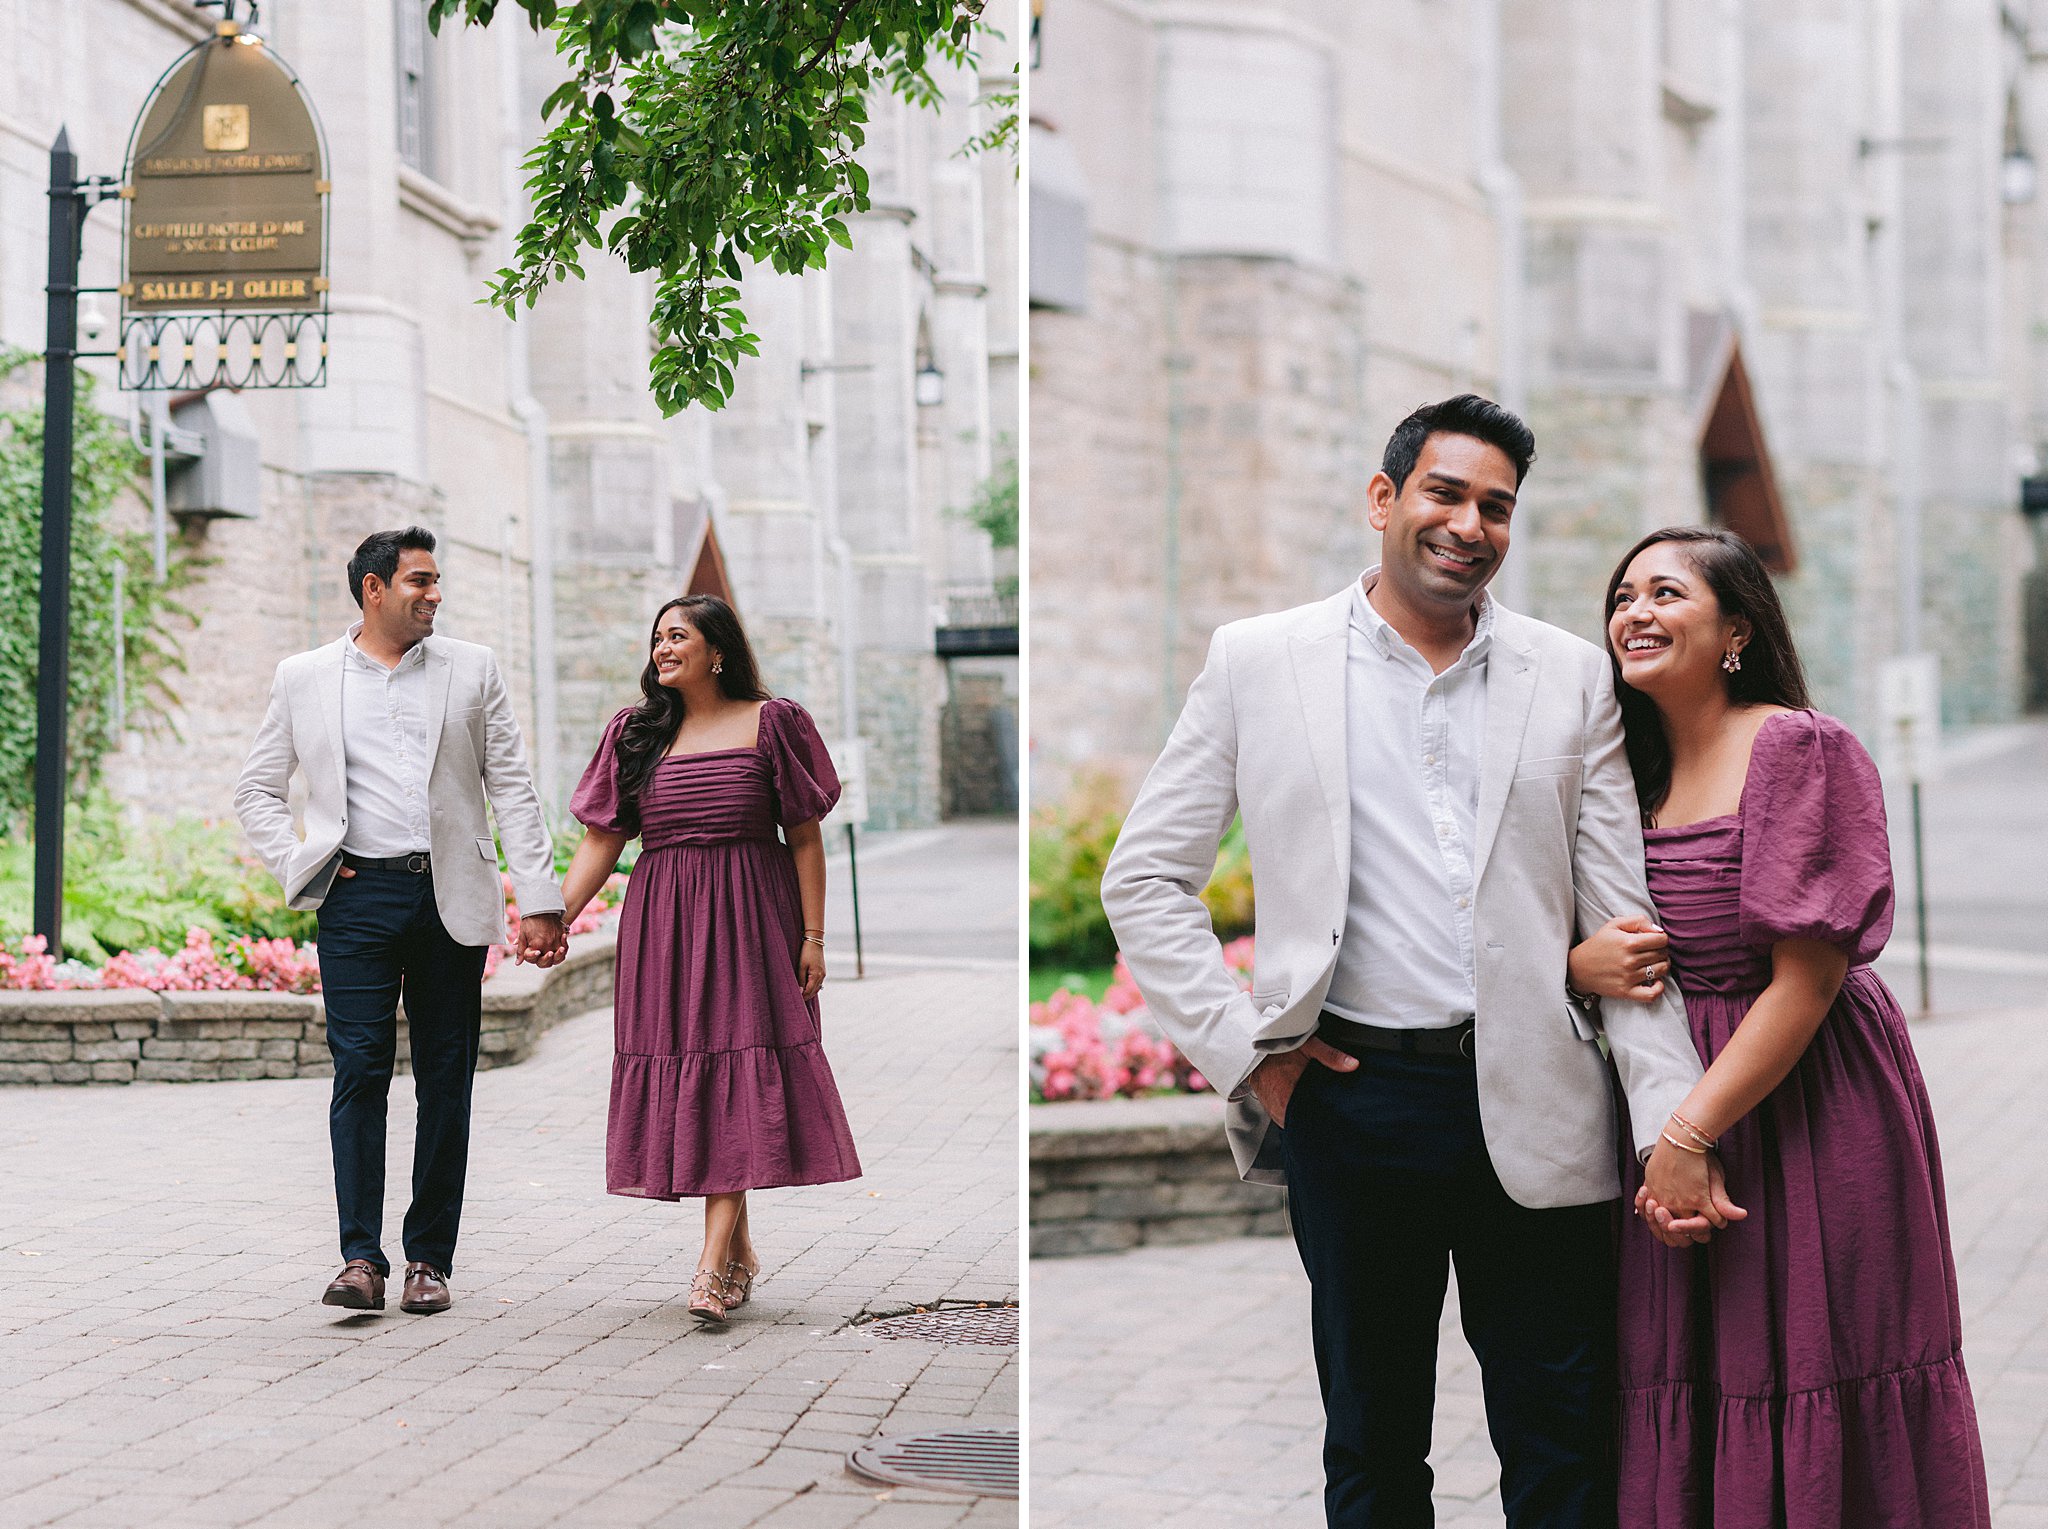 Exploring Montreal's romantic side during their engagement session